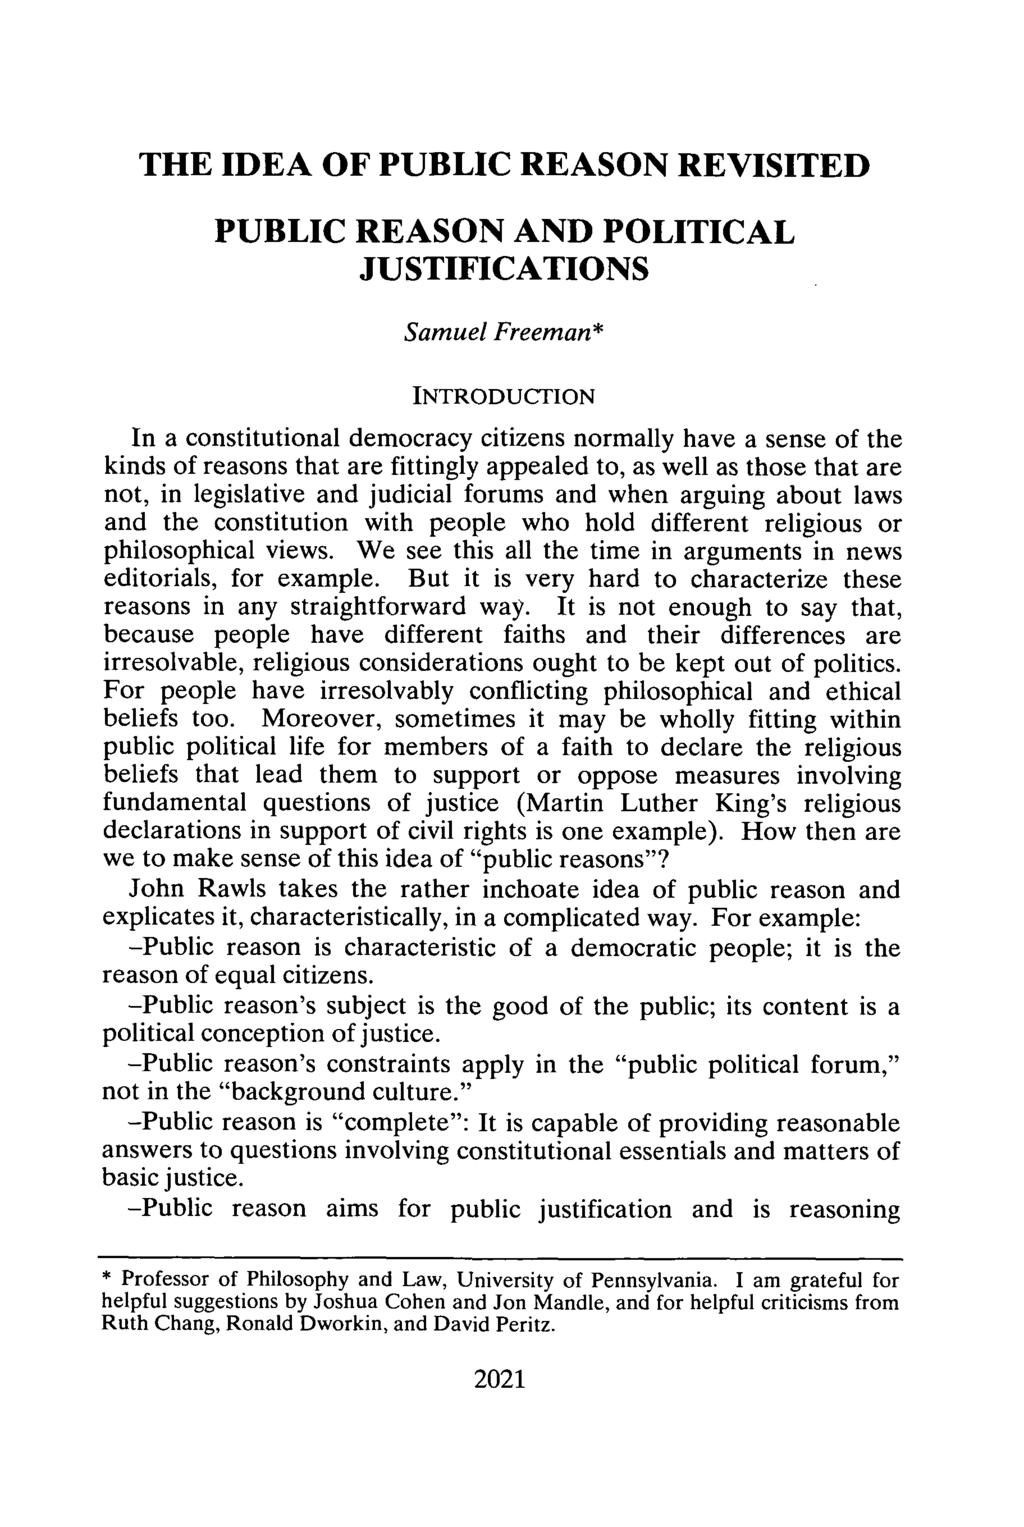 THE IDEA OF PUBLIC REASON REVISITED PUBLIC REASON AND POLITICAL JUSTIFICATIONS Samuel Freeman* INTRODUCTION In a constitutional democracy citizens normally have a sense of the kinds of reasons that